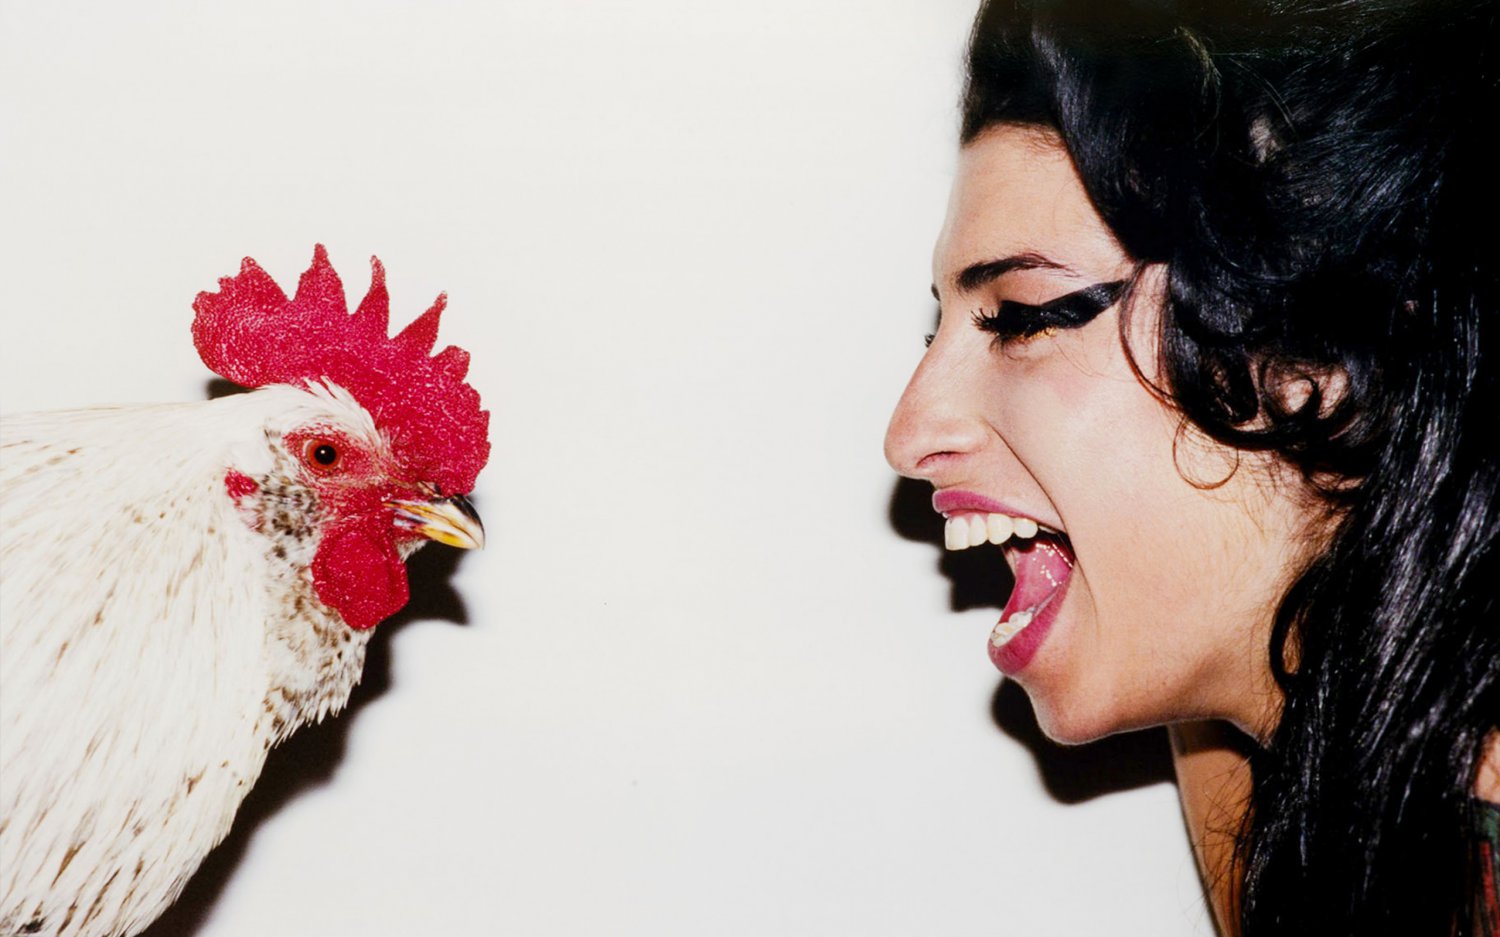 Amy Winehouse with a Chicken 18"x28" (45cm/70cm) Poster